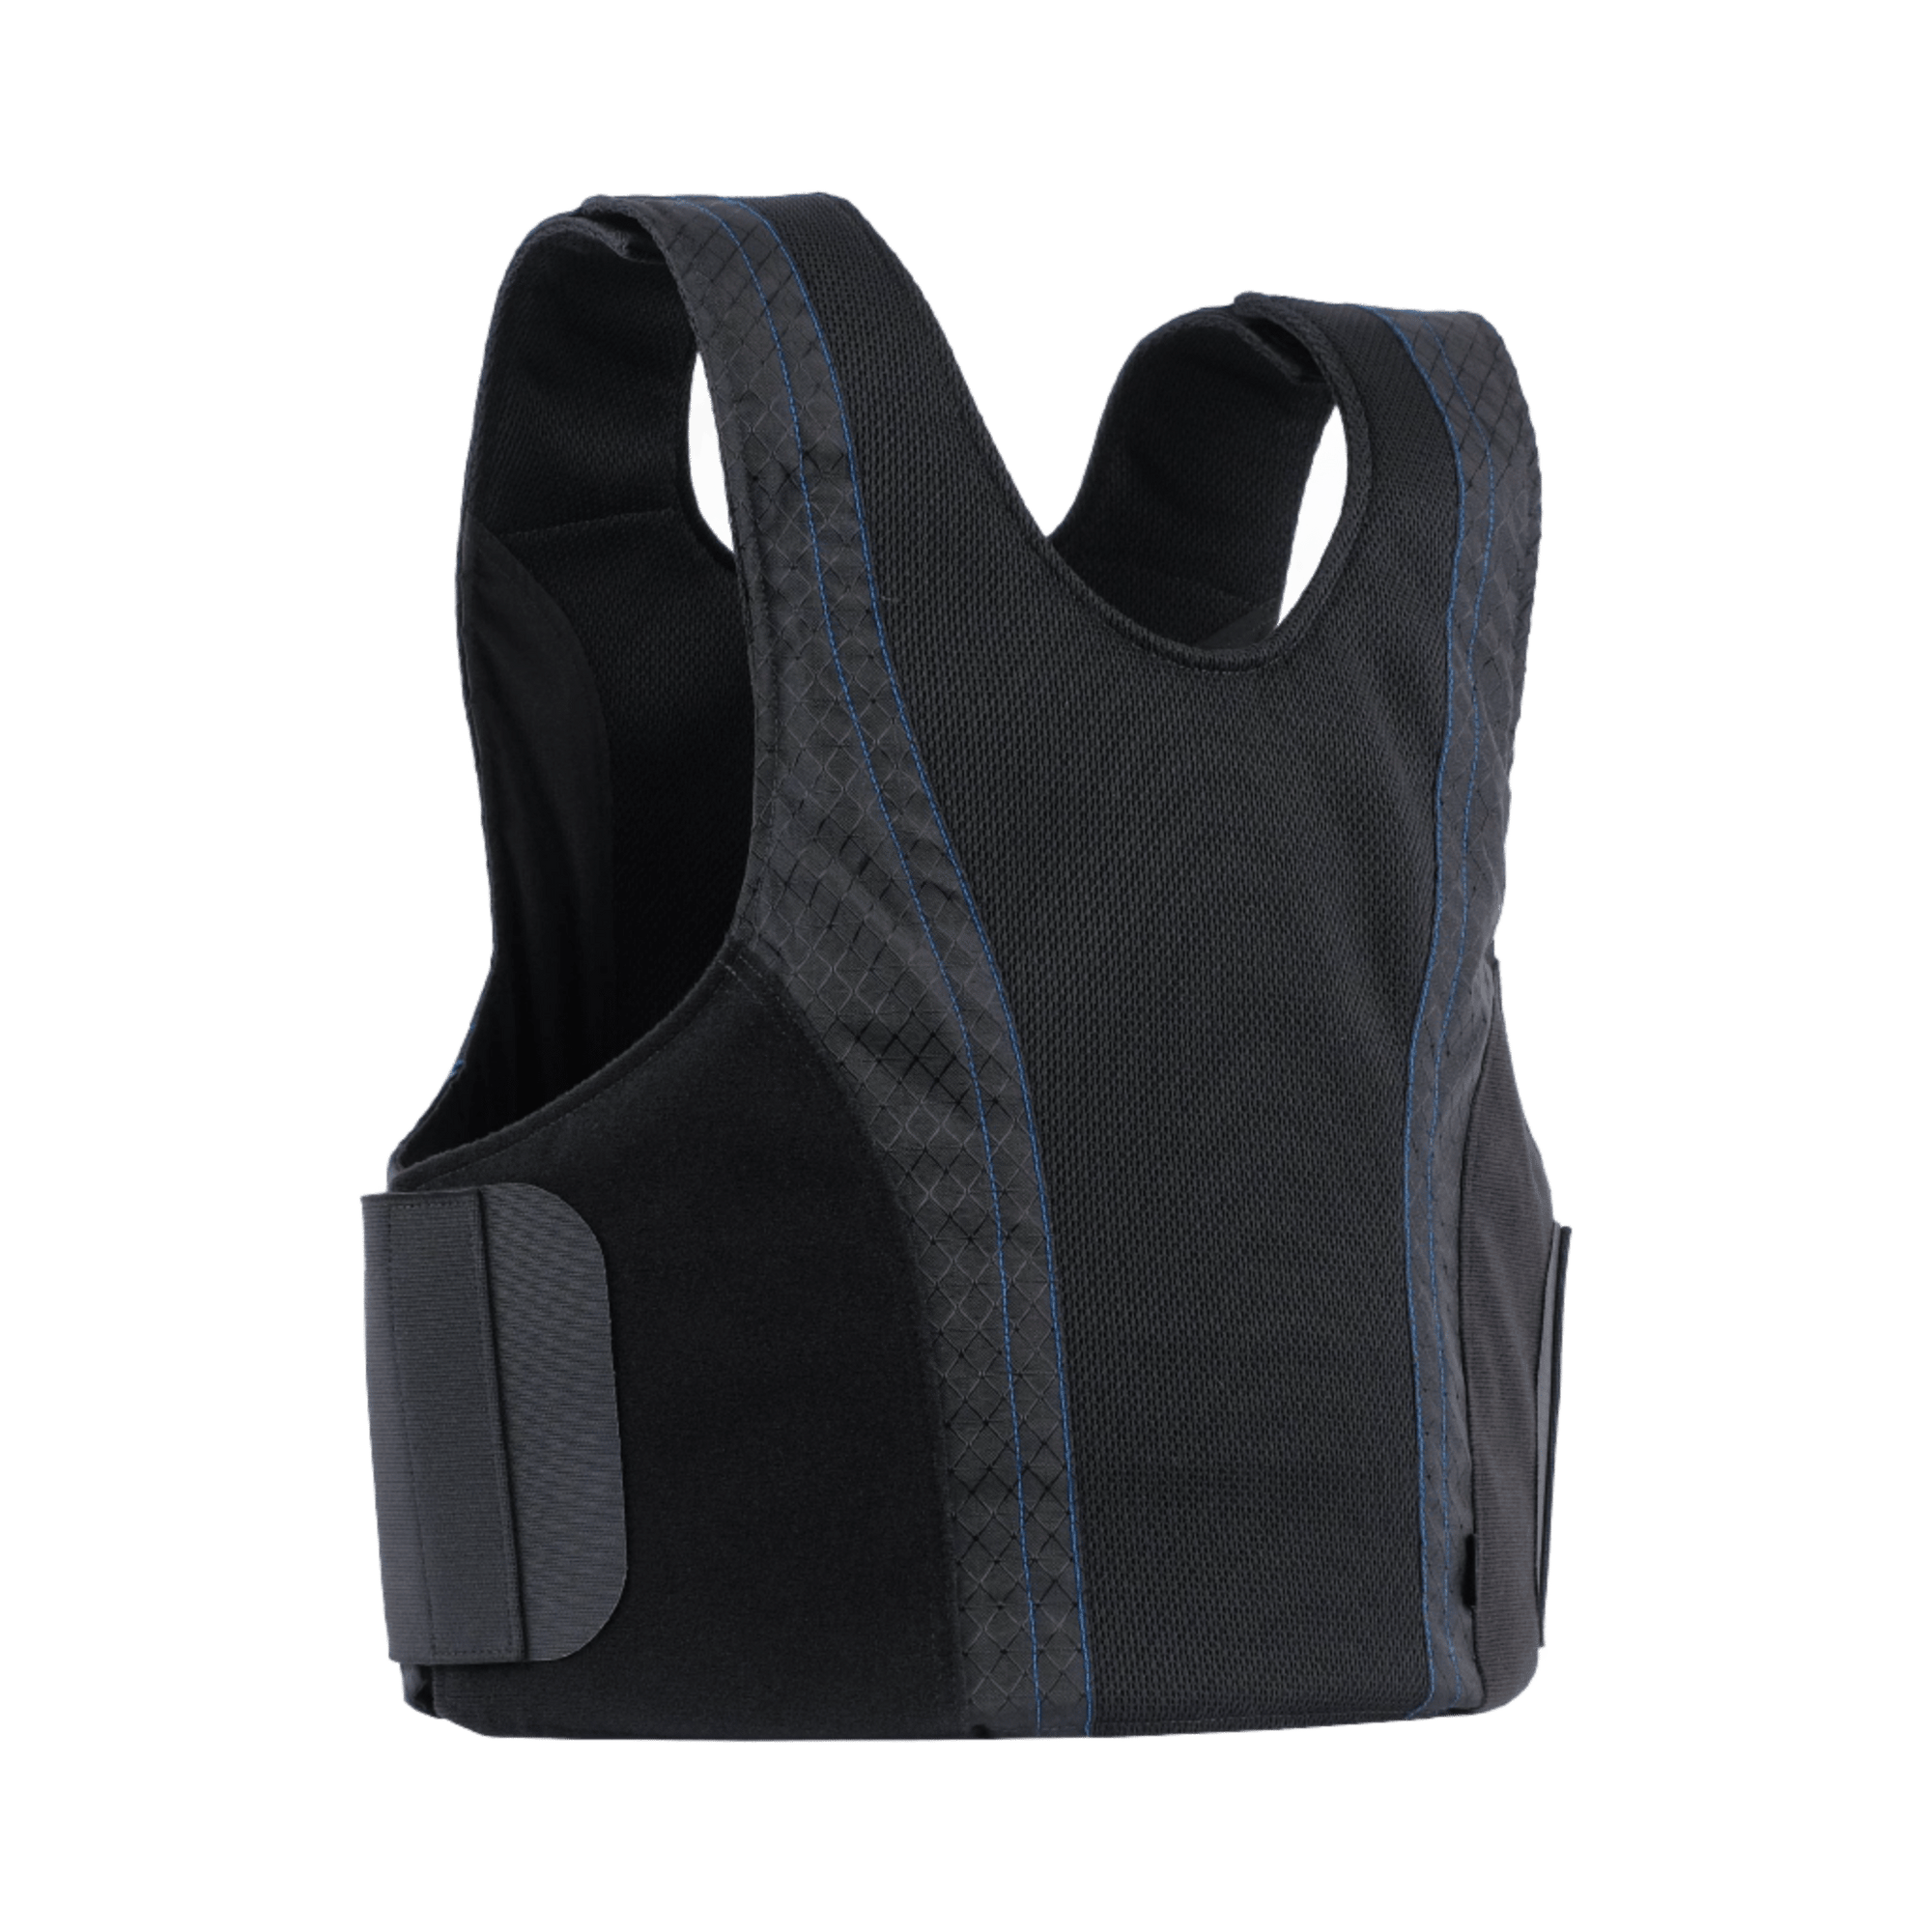 The new Concealable Armor Vest. This 3A soft body armor vest was built for the everyday man. This vest can be used as a concealed body armor vest underneath clothing, or used as an exterior body armor vest. This vest is rugged and comfortable. NIJ Certified Level IIIA body armor vest.